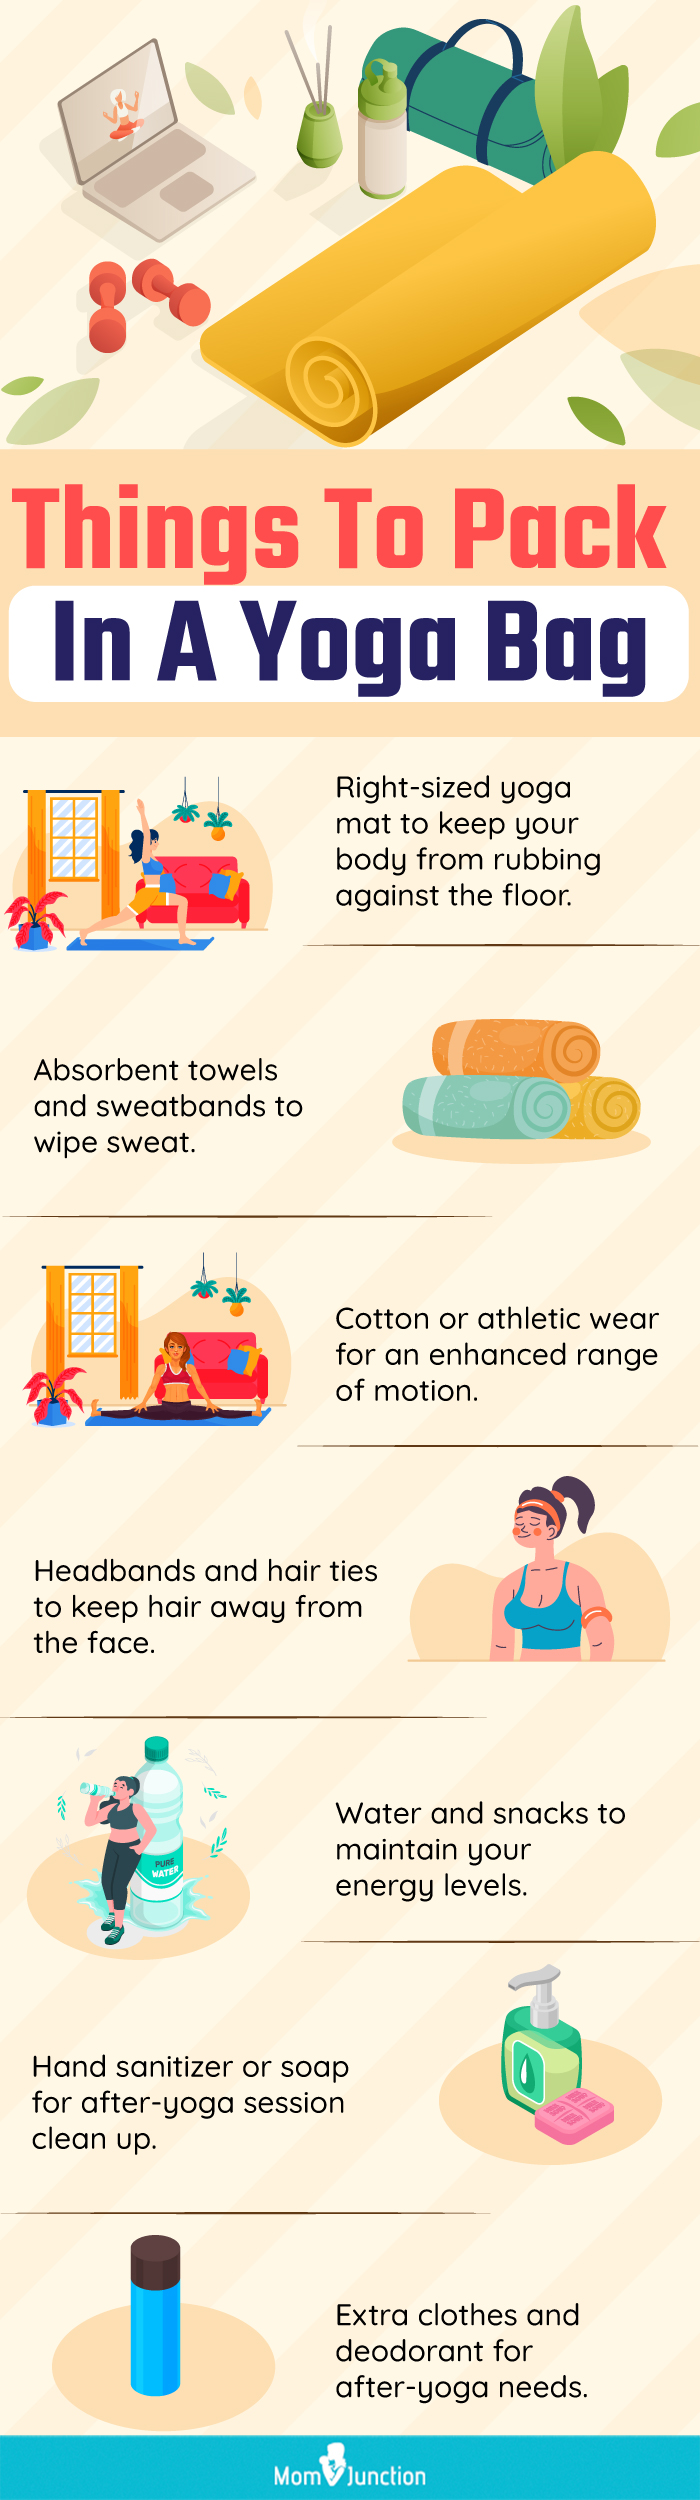 Things To Pack In A Yoga Bag (infographic)